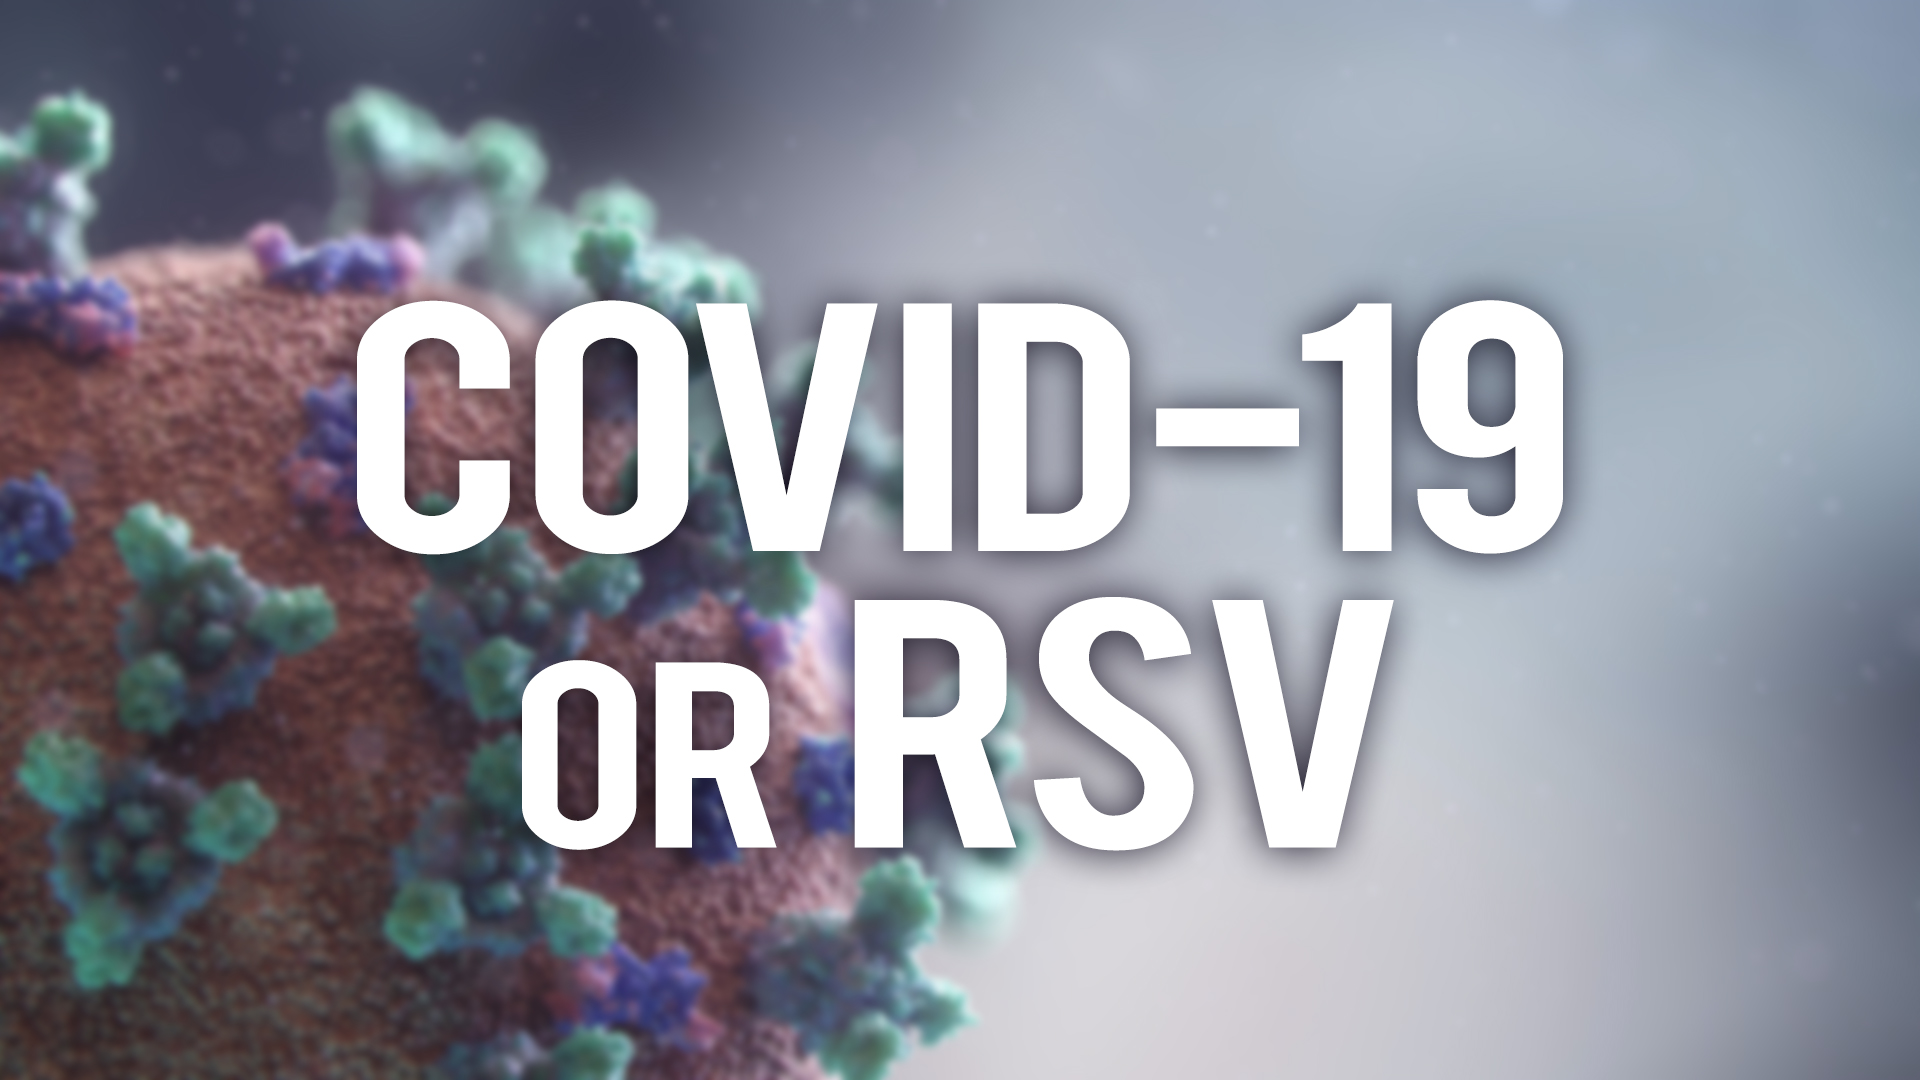 COVID-19 or RSV